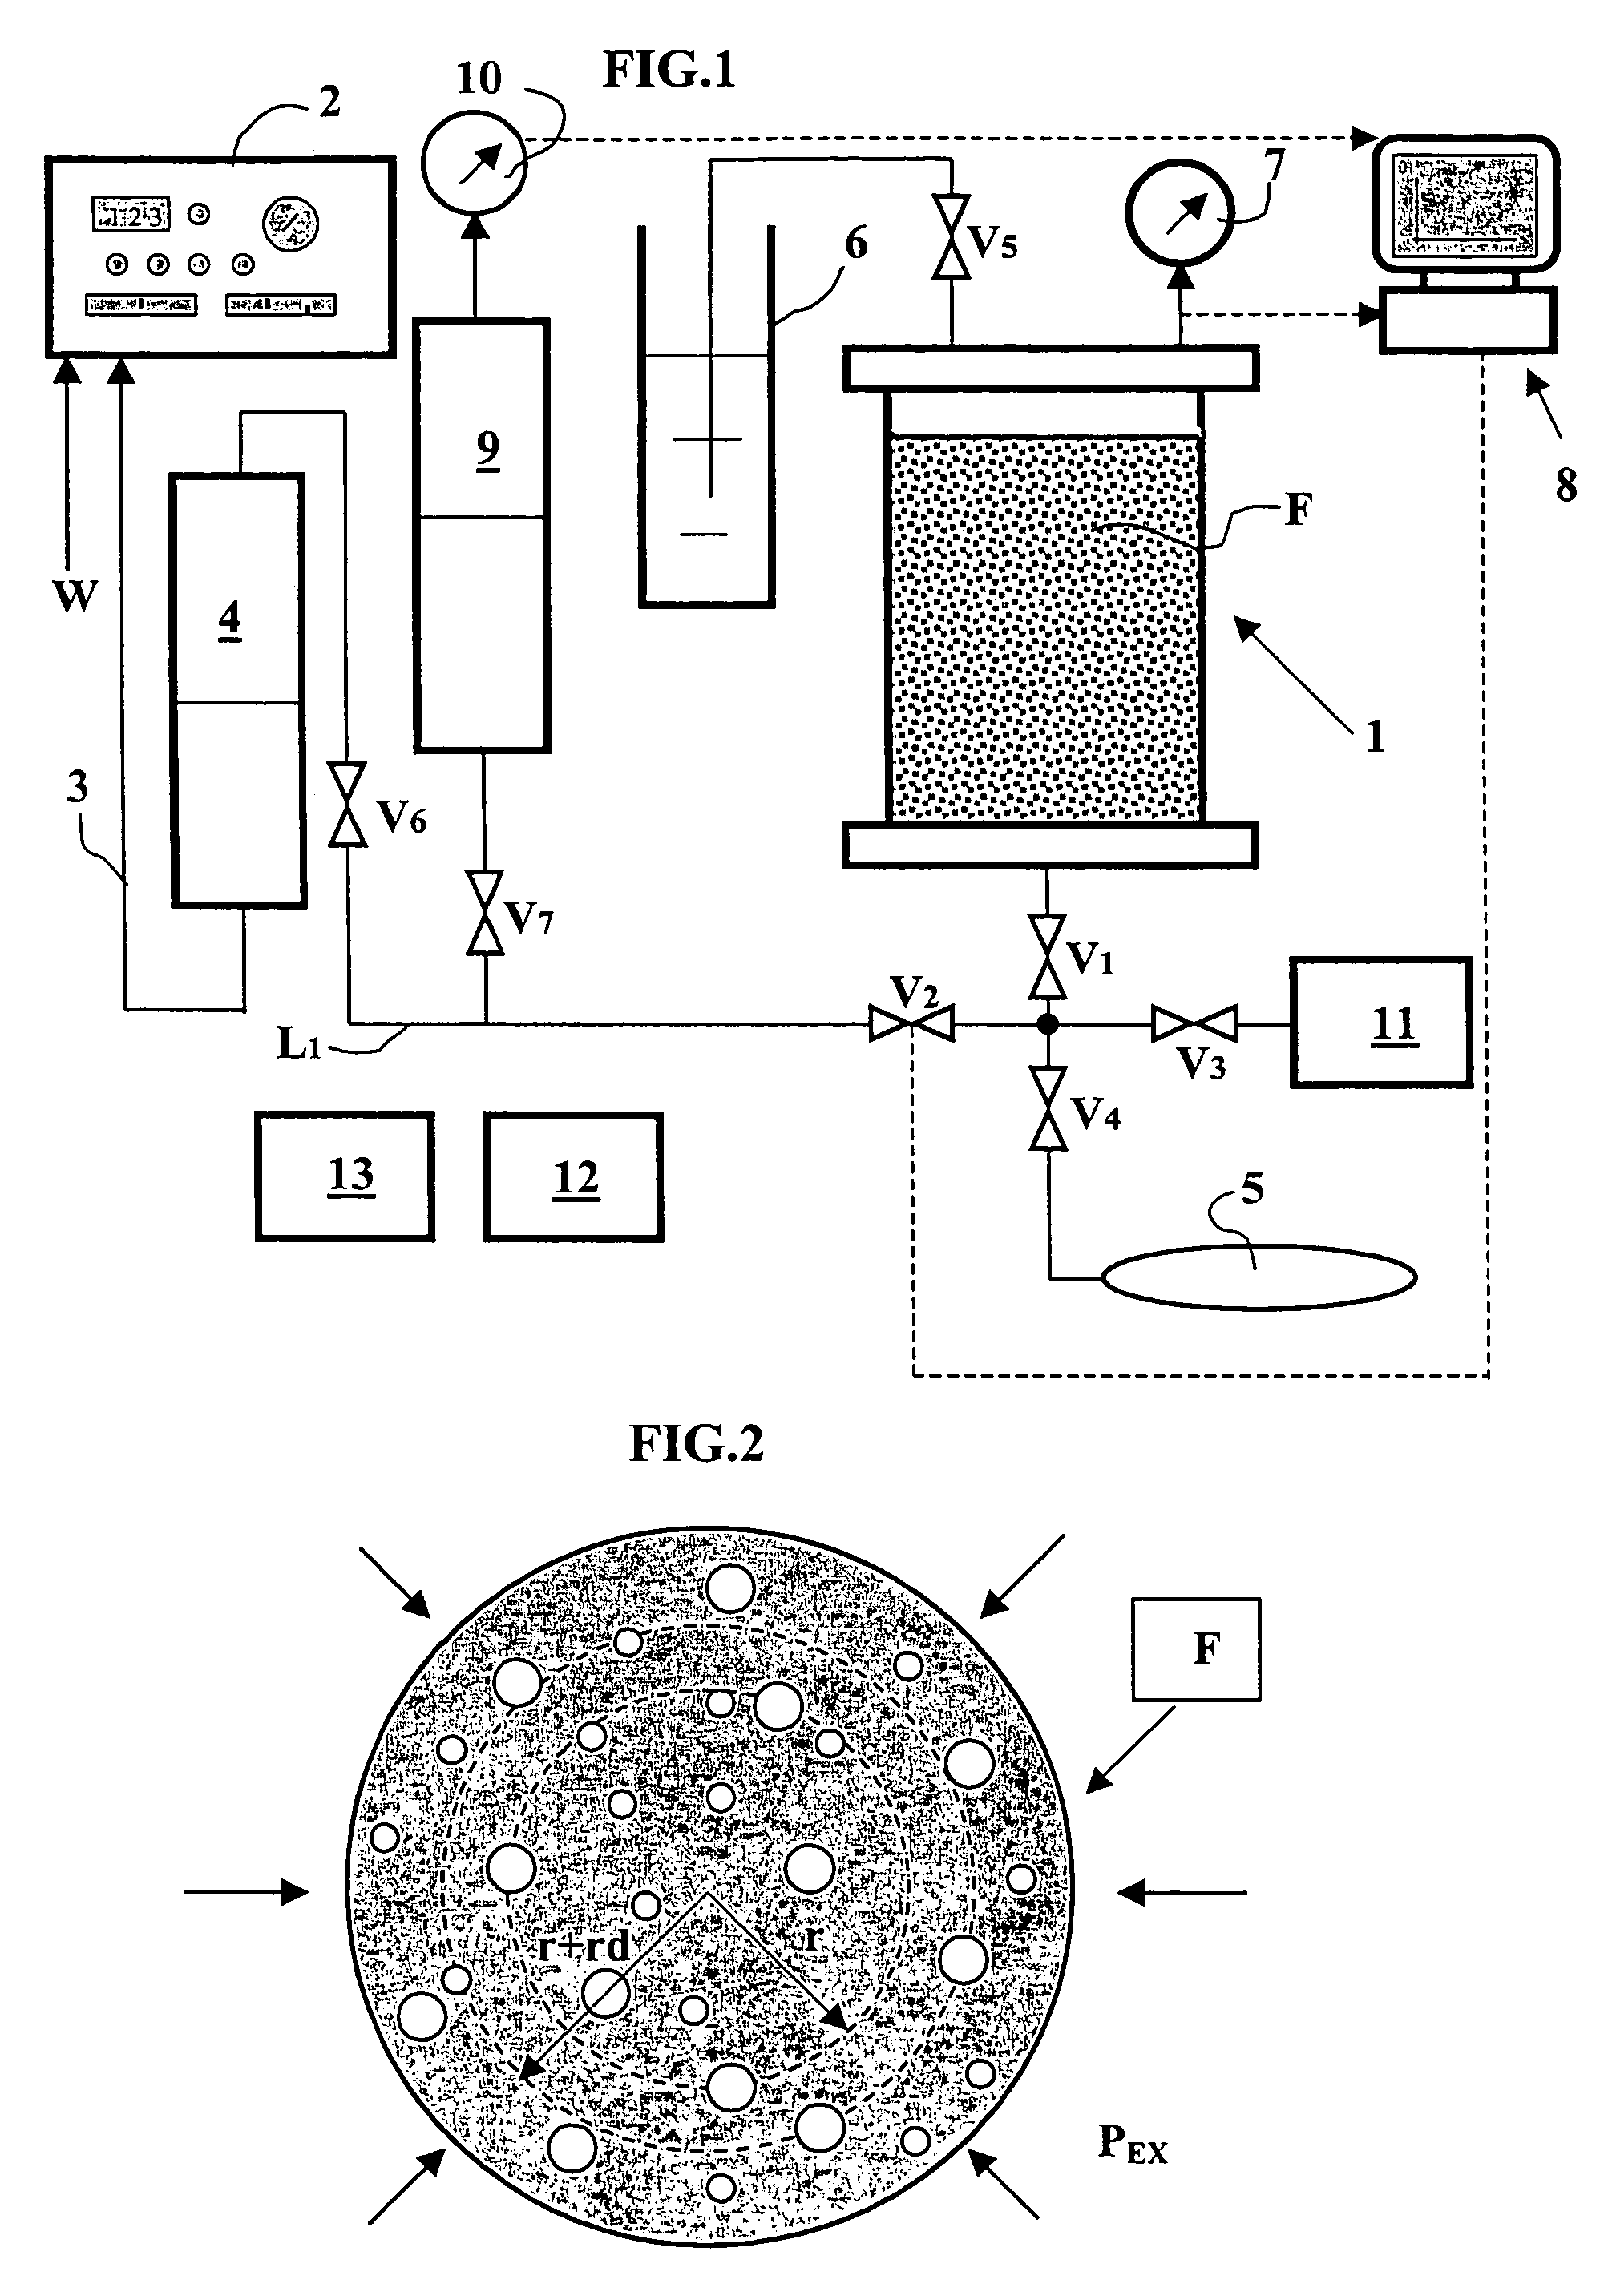 Method and device for evaluating physical parameters of an underground reservoir from rock cuttings taken therefrom